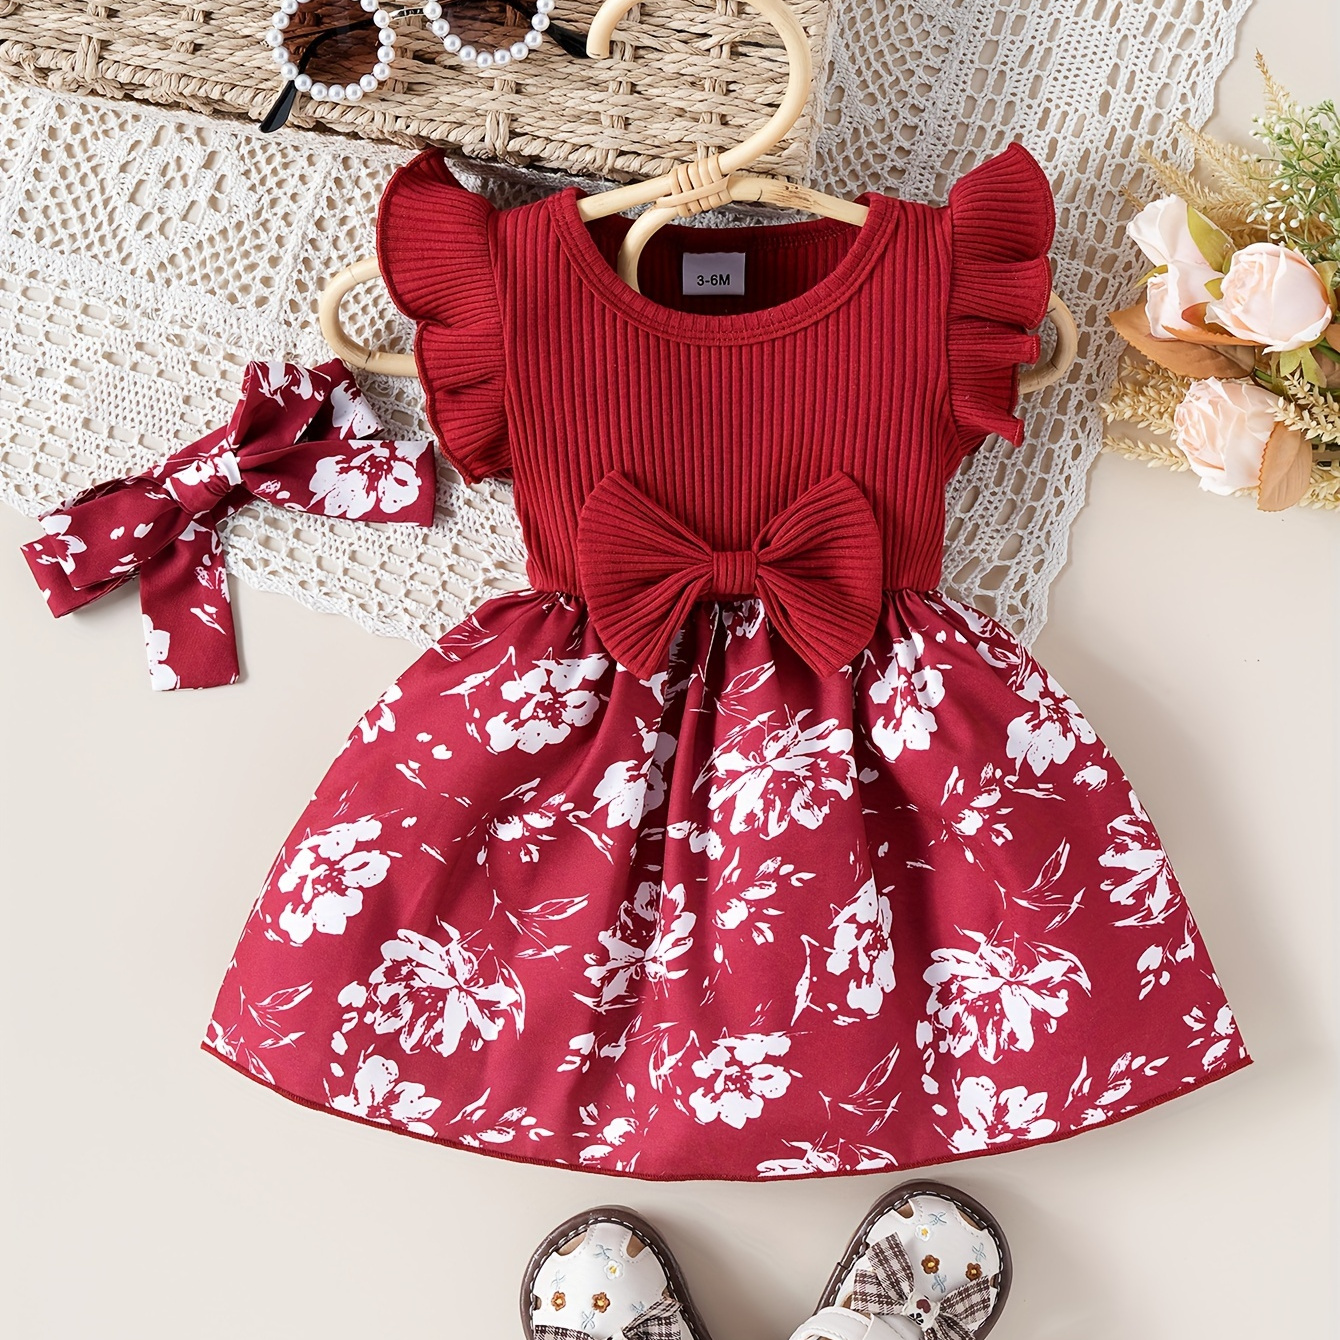 

Baby's Flower Pattern Splicing Ribbed Dress & Headband, Casual Bowknot Decor Cap Sleeve Dress, Infant & Toddler Girl's Clothing For Summer/spring, As Gift